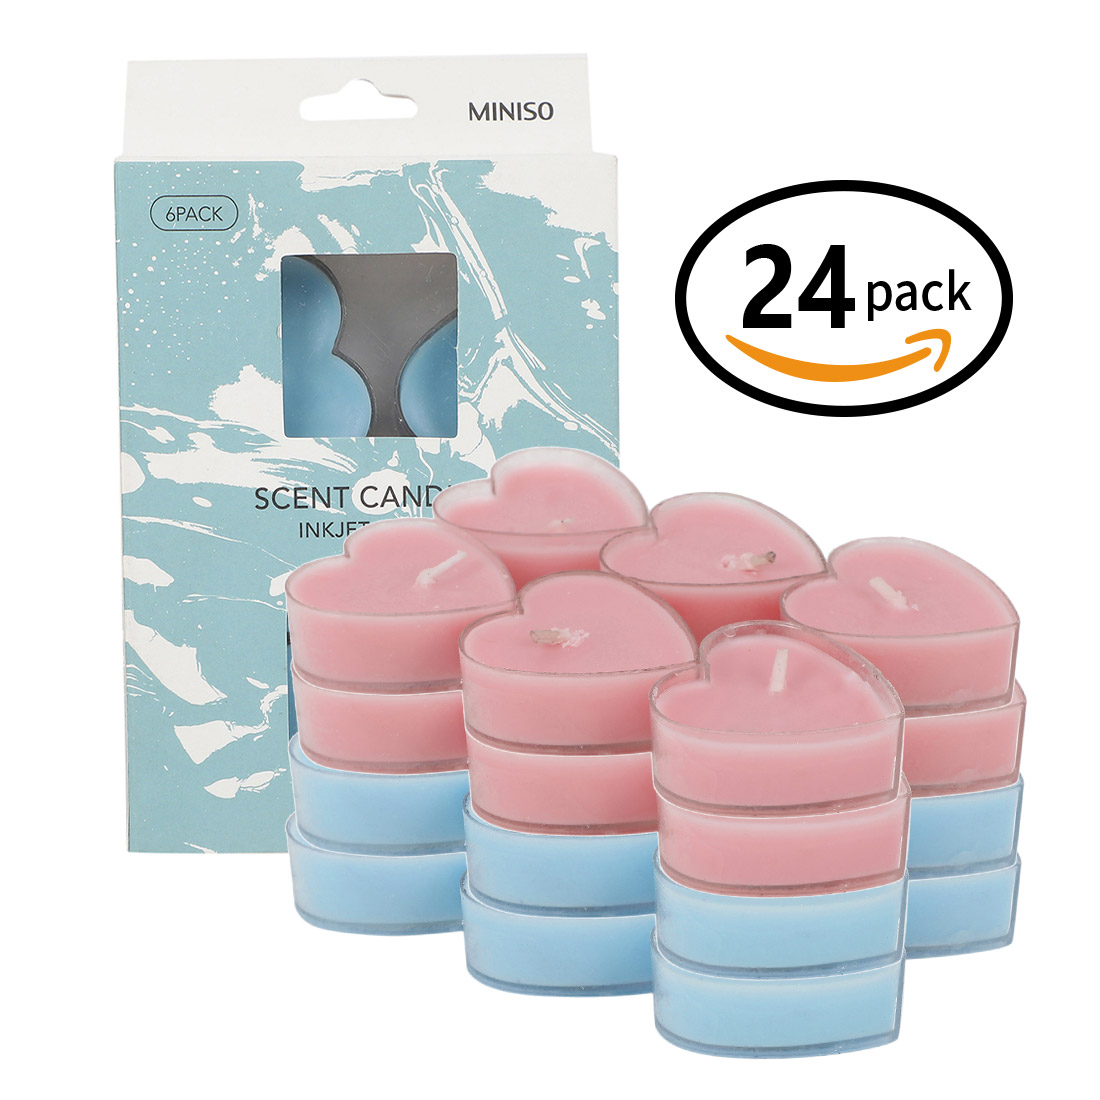 MINISO 24 Pack Inkjet Series-Heart Scented Candle Pink+Blue)